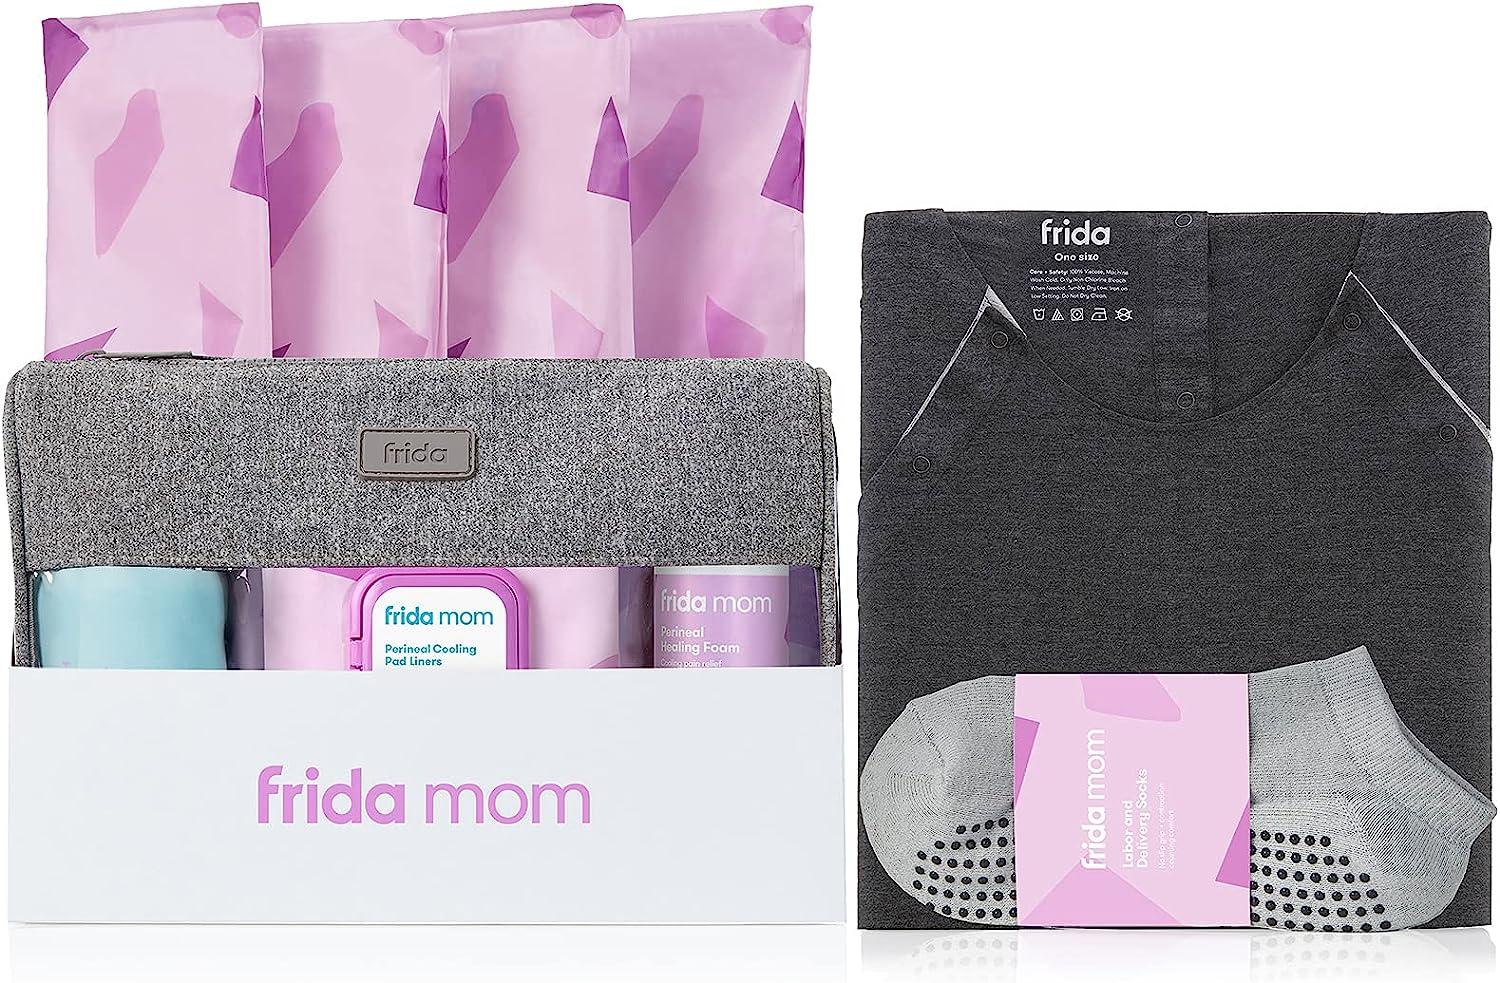  Mom and Baby Hospital Bag Essentials Set - Complete Postpartum  Care Kit with Postpartum Essentials, Baby Essentials, and New Mom Gifts for  Labor, Delivery, and Beyond : Baby